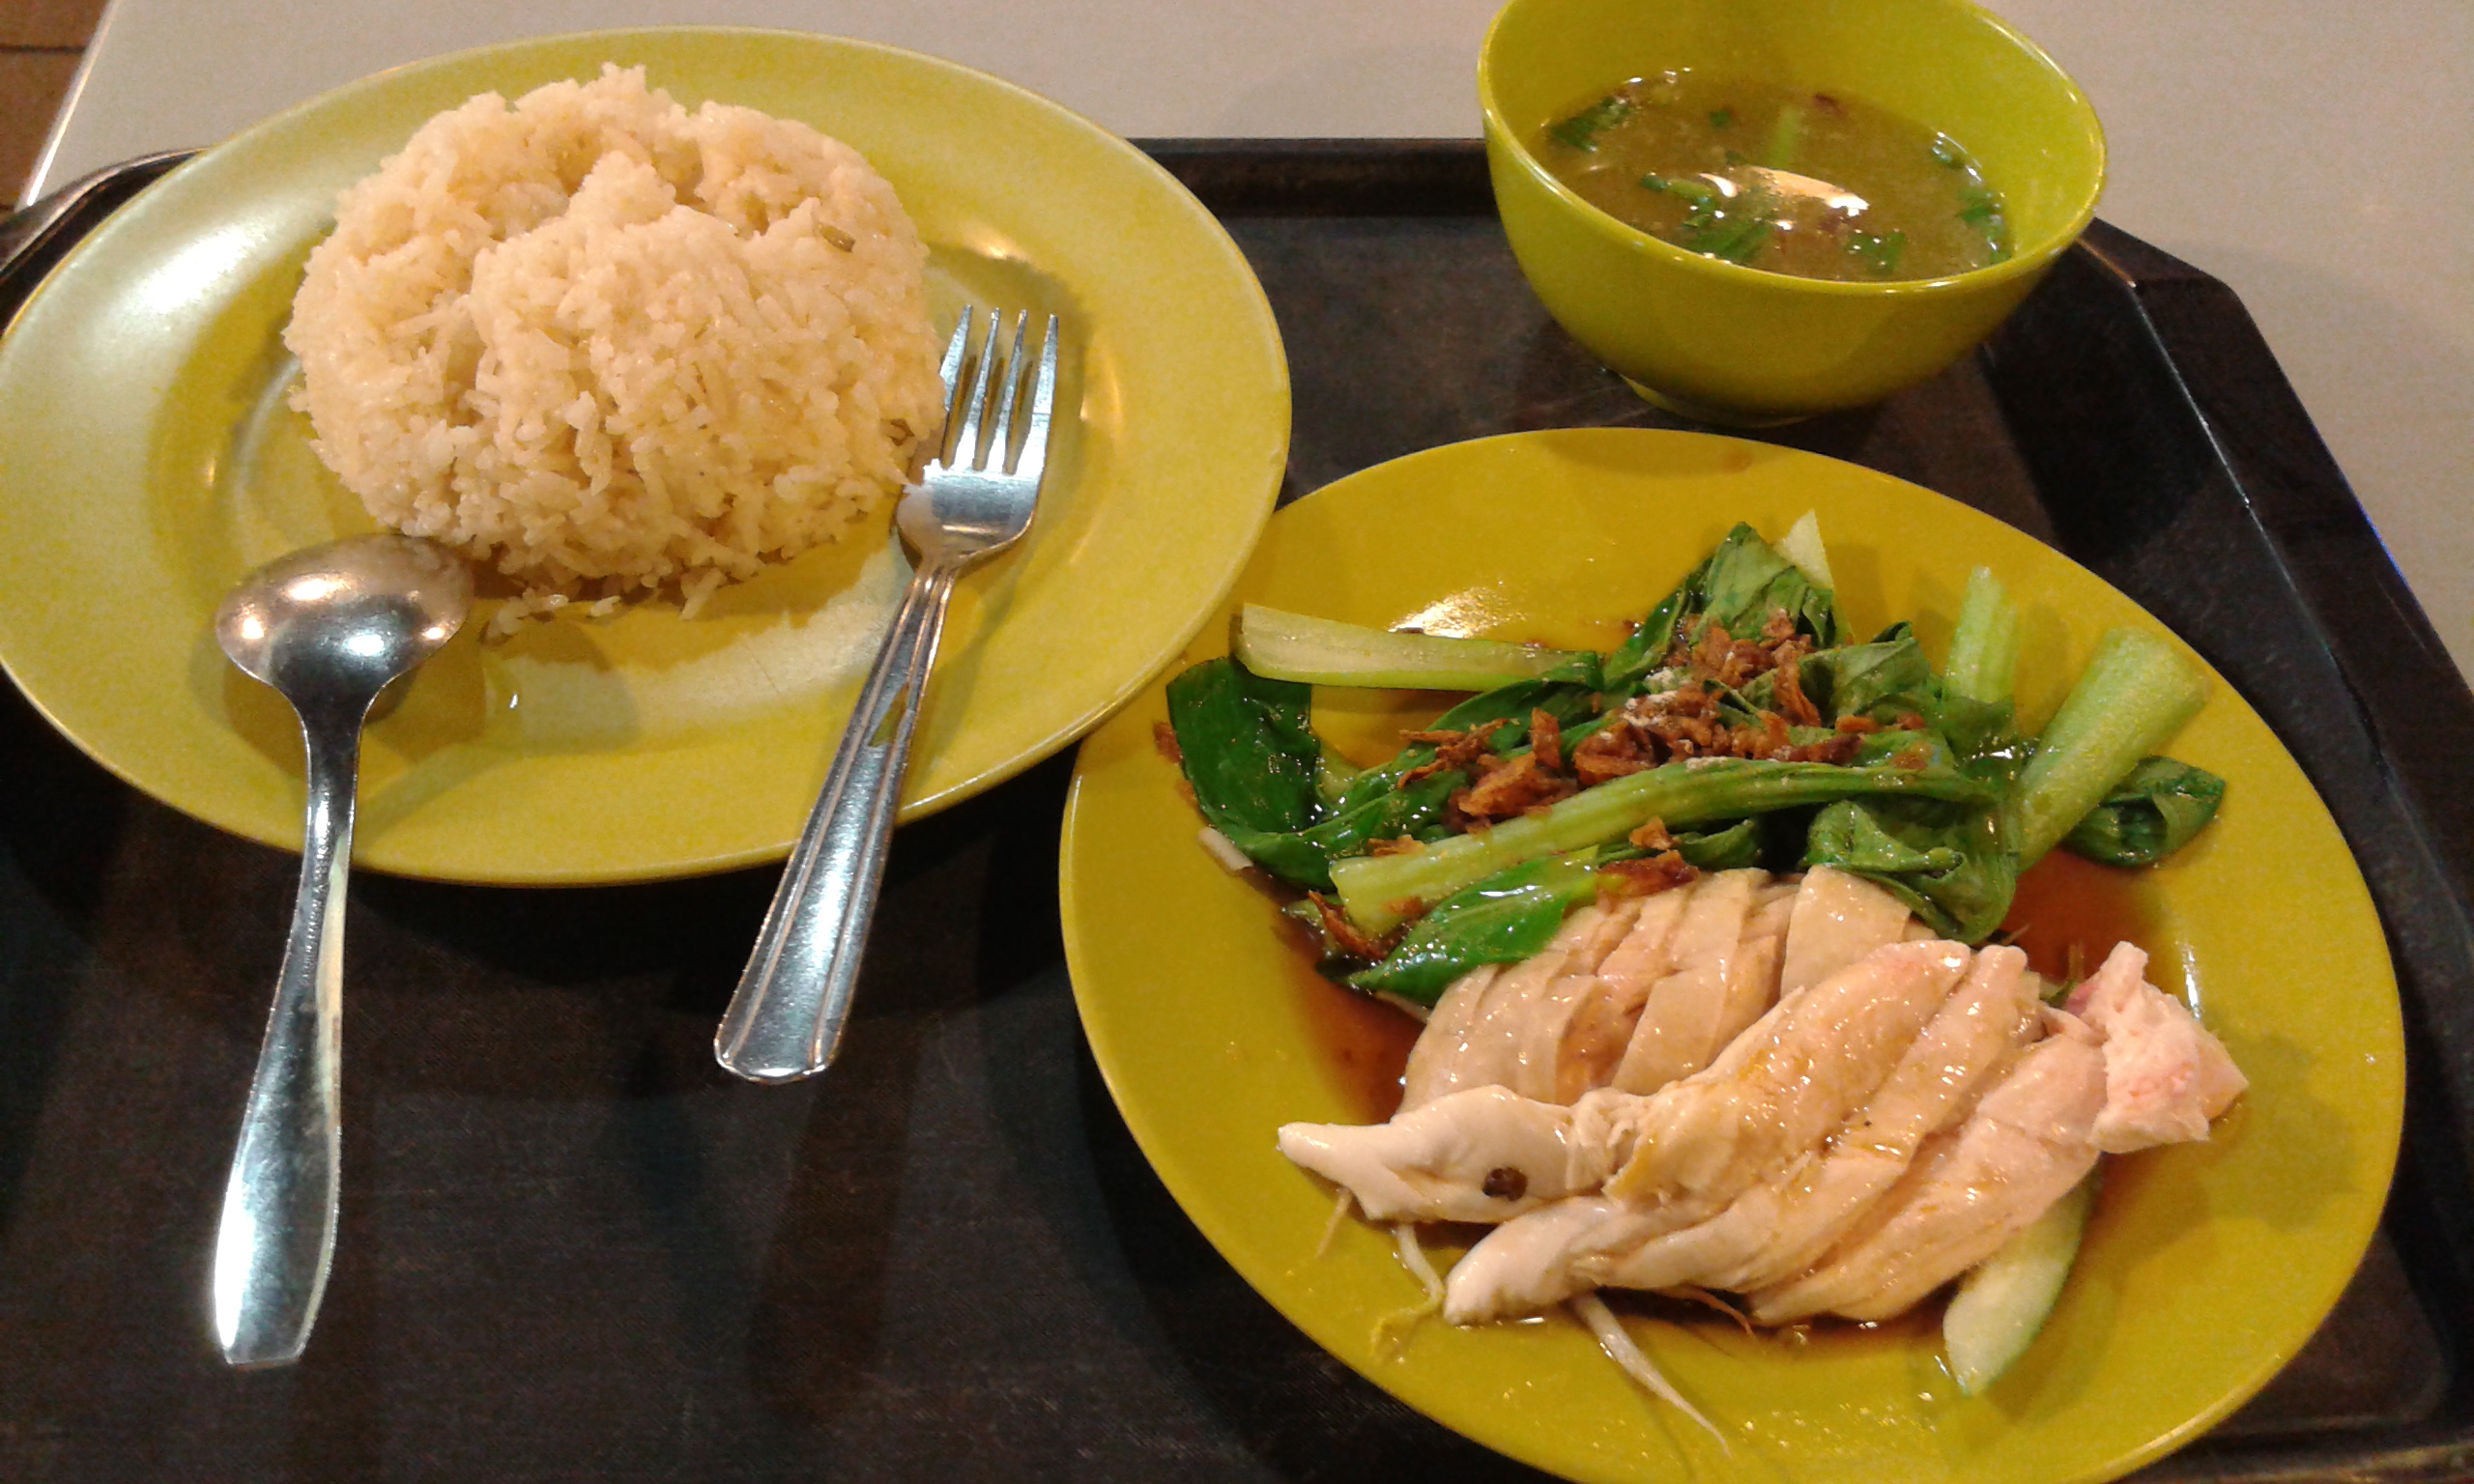 Hainanese Chicken Rice from a hawker centre in Singapore.